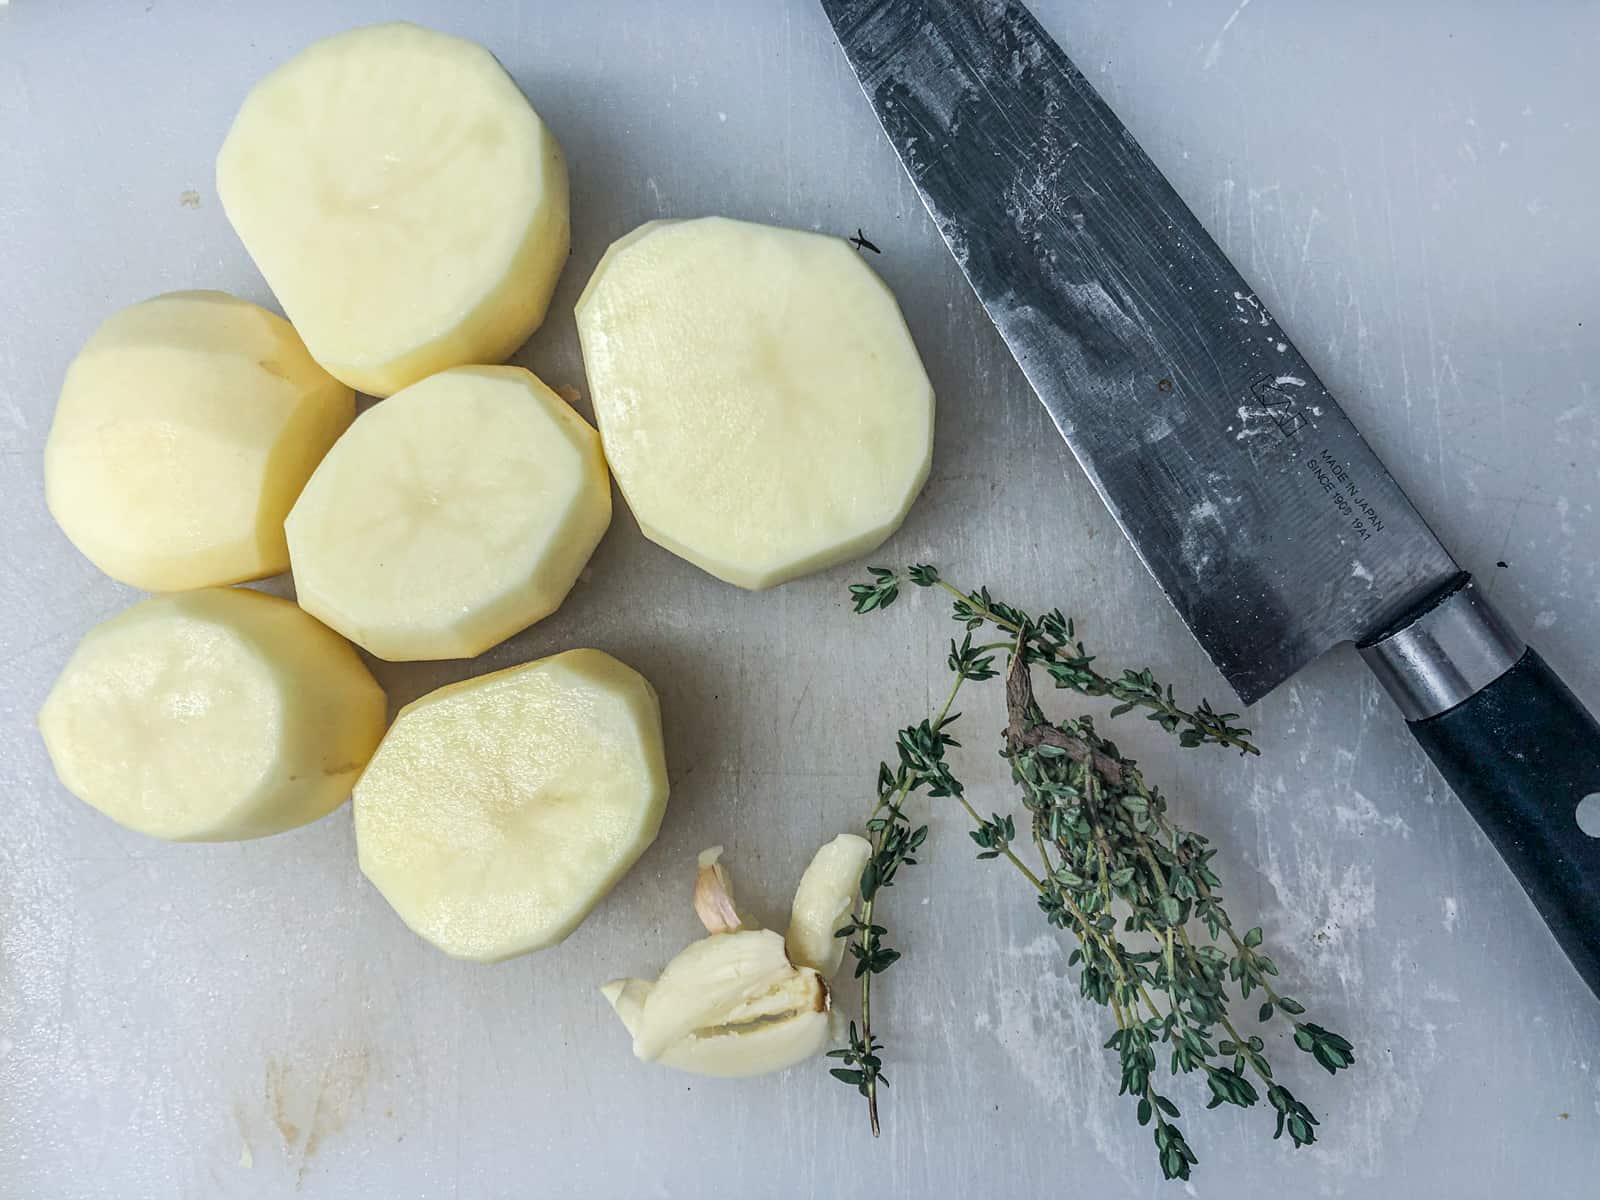 Peeled potatoes, smashed garlic cloves and fresh thyme leaves prepped on a white chopping board with a chefs knife.